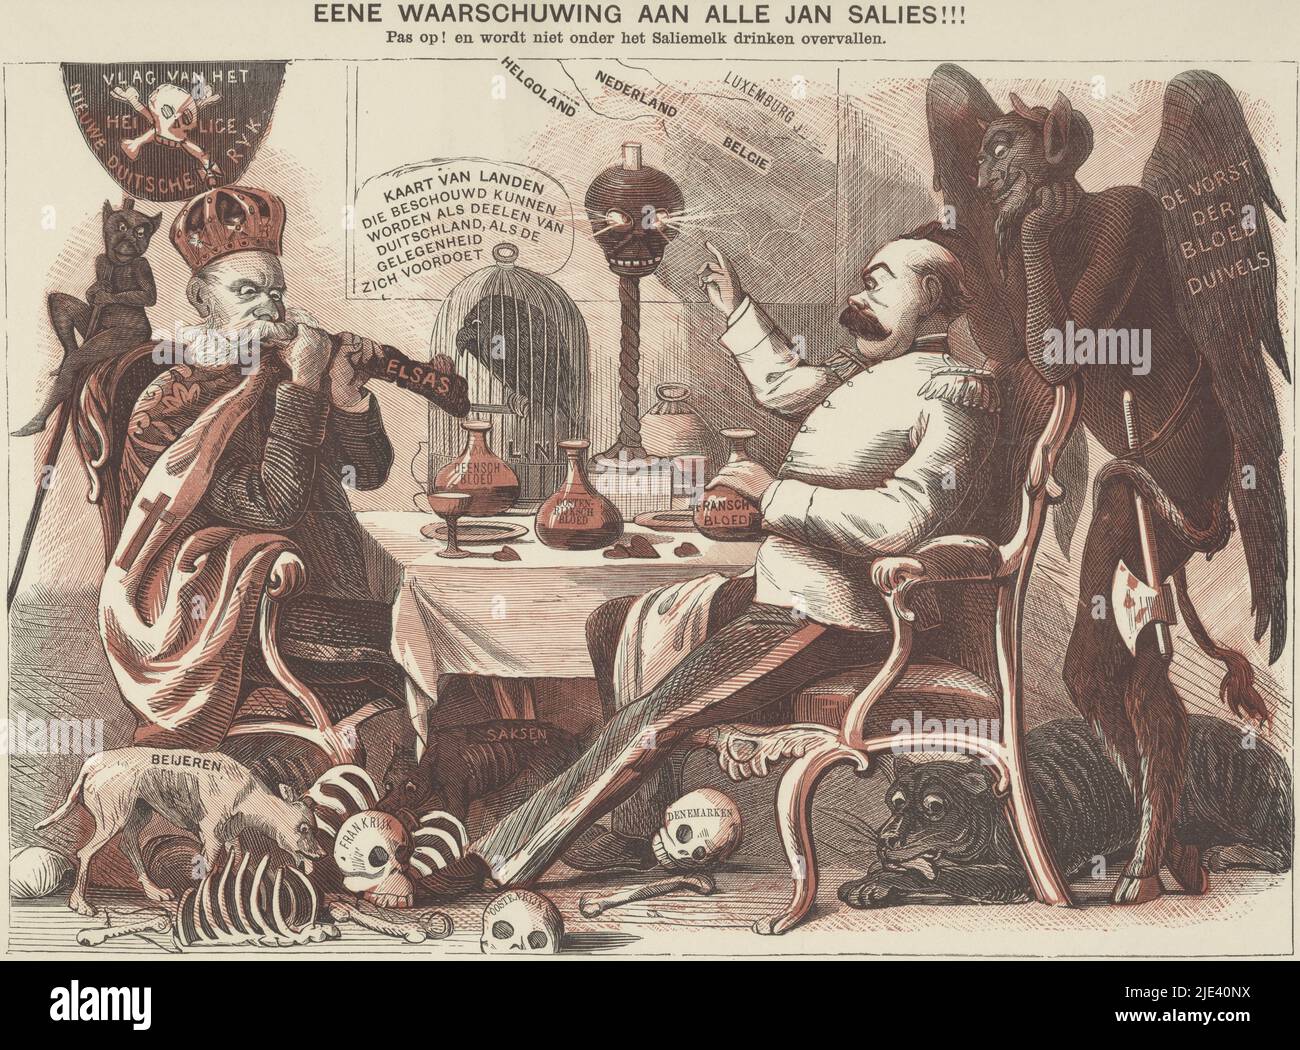 Cartoon on Kaiser Wilhelm I and Bismarck, 1870, anonymous, 1870, Cartoon on bloodthirstiness of Kaiser Wilhelm I and Otto von Bismarck, 1870. Kaiser Wilhelm sits at table with Bismarck on one leg 'Elsas' coloring. On the table are carafes of Danish, Austrian, and French blood. On the floor are skulls and bones from earlier meals. Behind Bismarck's chair, the devil looks on approvingly. In the caption the conversation between Kaiser Wilhelm, Bismarck and the devil., print maker: anonymous, publisher: Jacobus George Robbers, (mentioned on object), print maker: Netherlands, publisher: Rotterdam Stock Photo